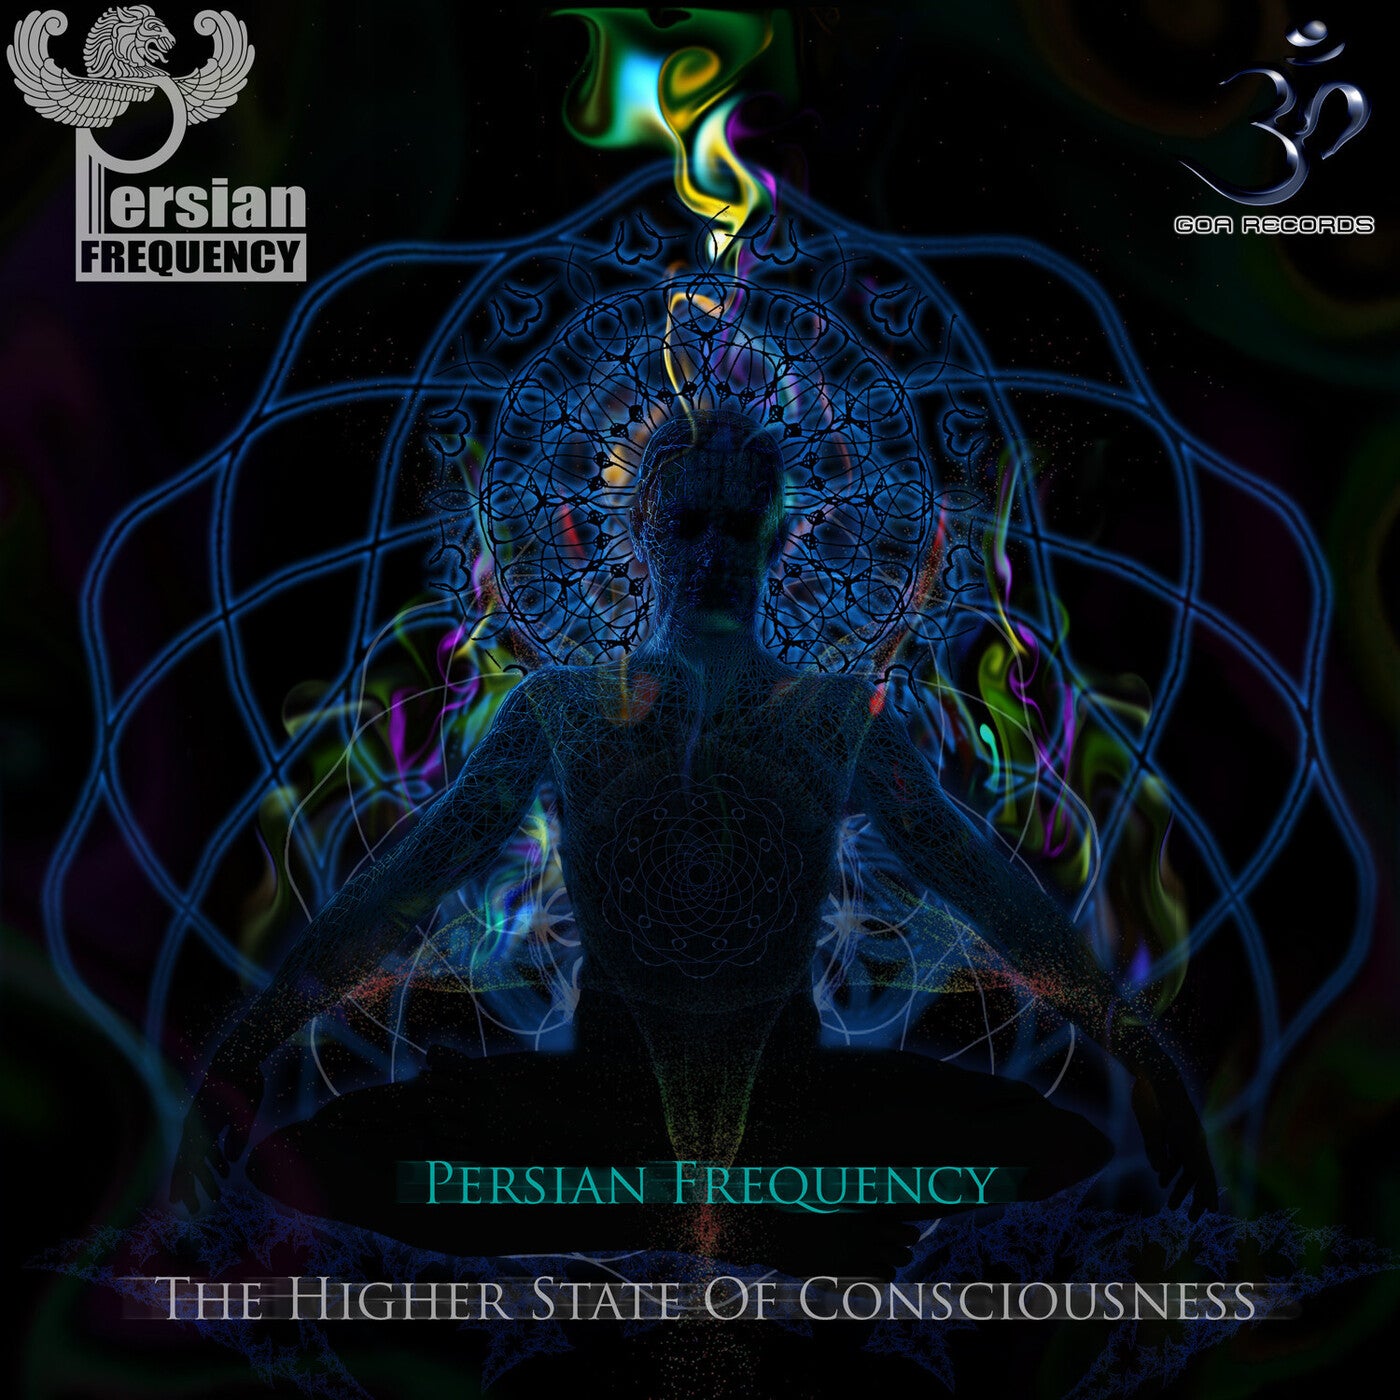 The Higher State of Consciousness